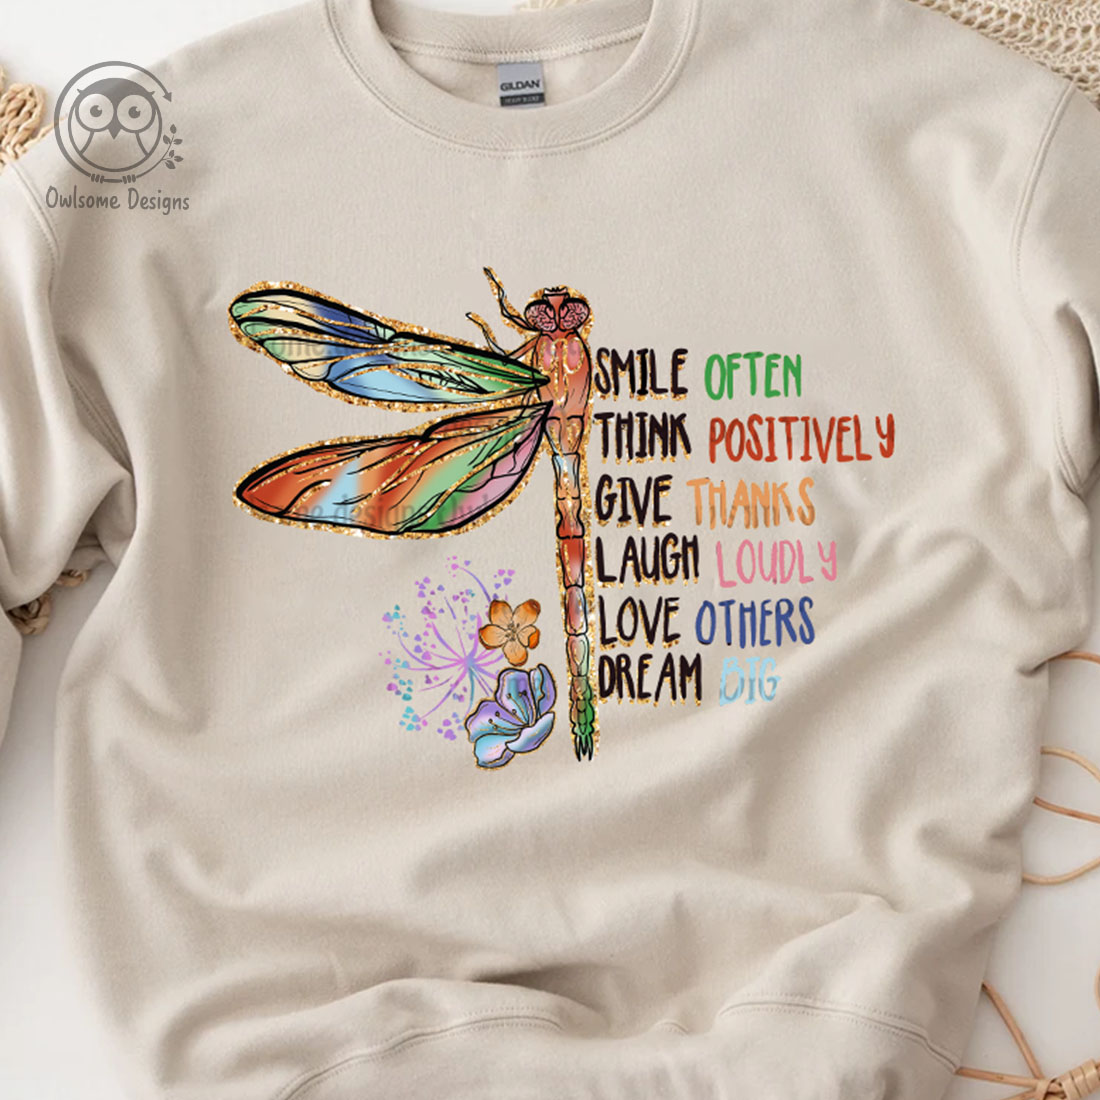 Image of a sweatshirt with a unique dragonfly print and slogan.